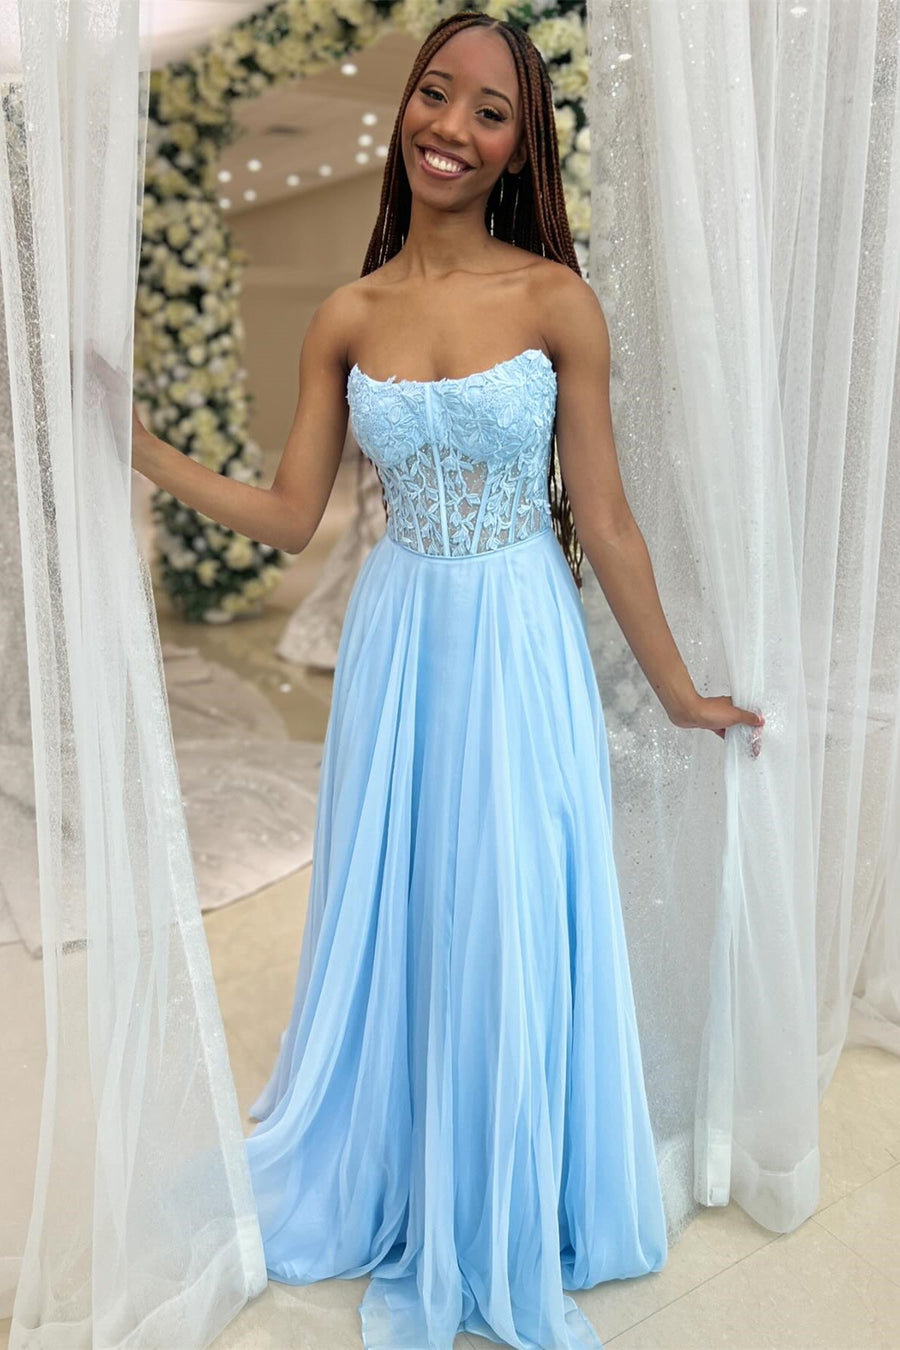 Chiffon Appliques Strapless A-Line Long Prom Dress in light blue